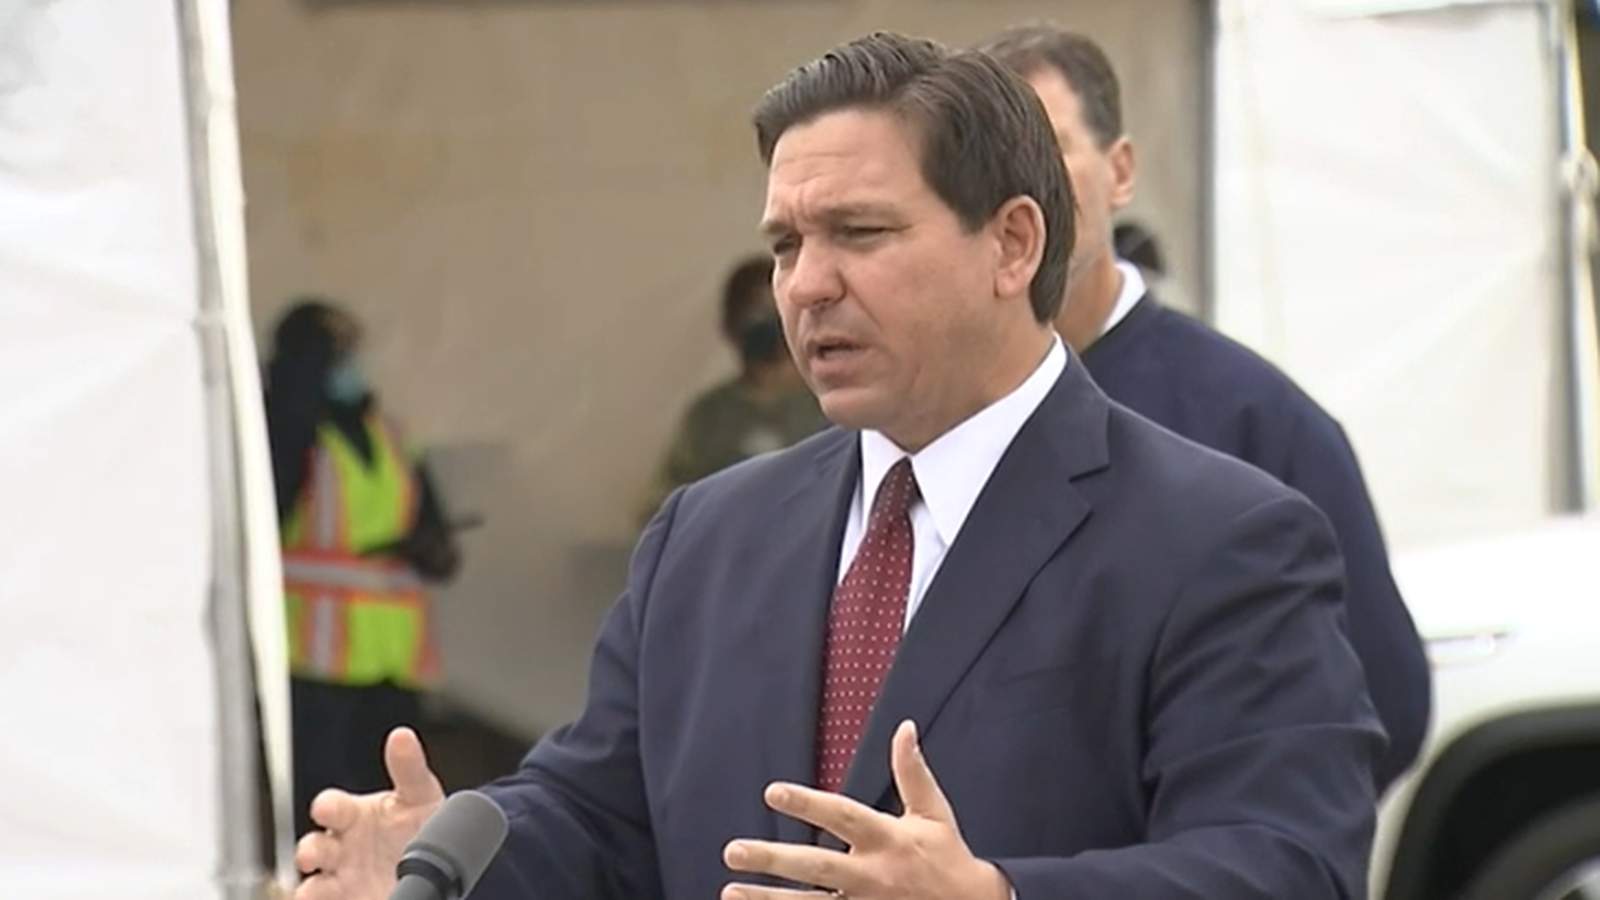 WATCH LIVE: Gov. Ron DeSantis holds news conference in St. Johns County